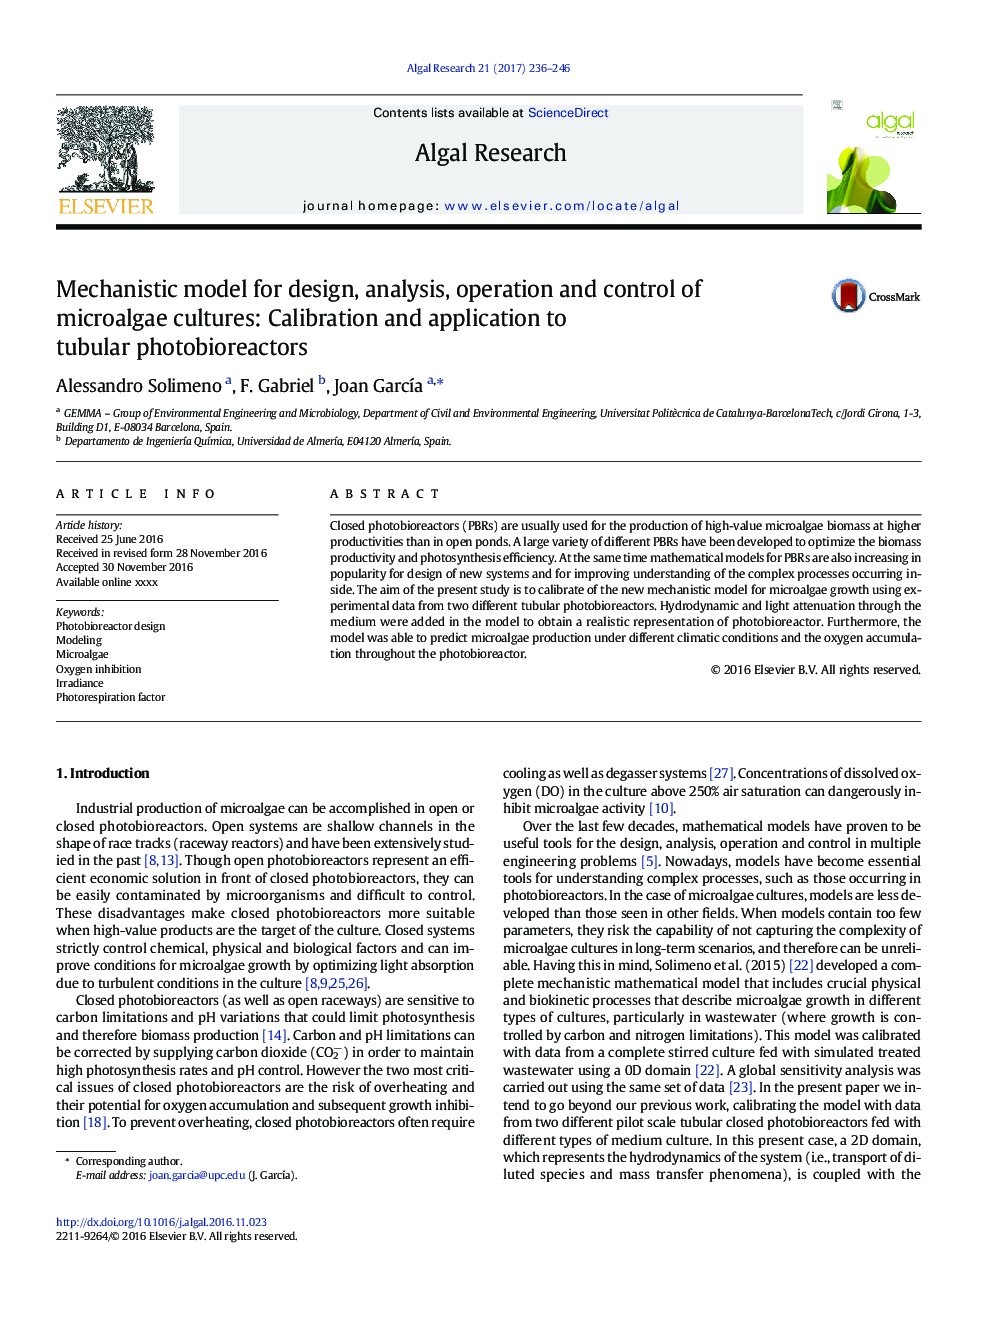 Mechanistic model for design, analysis, operation and control of microalgae cultures: Calibration and application to tubular photobioreactors